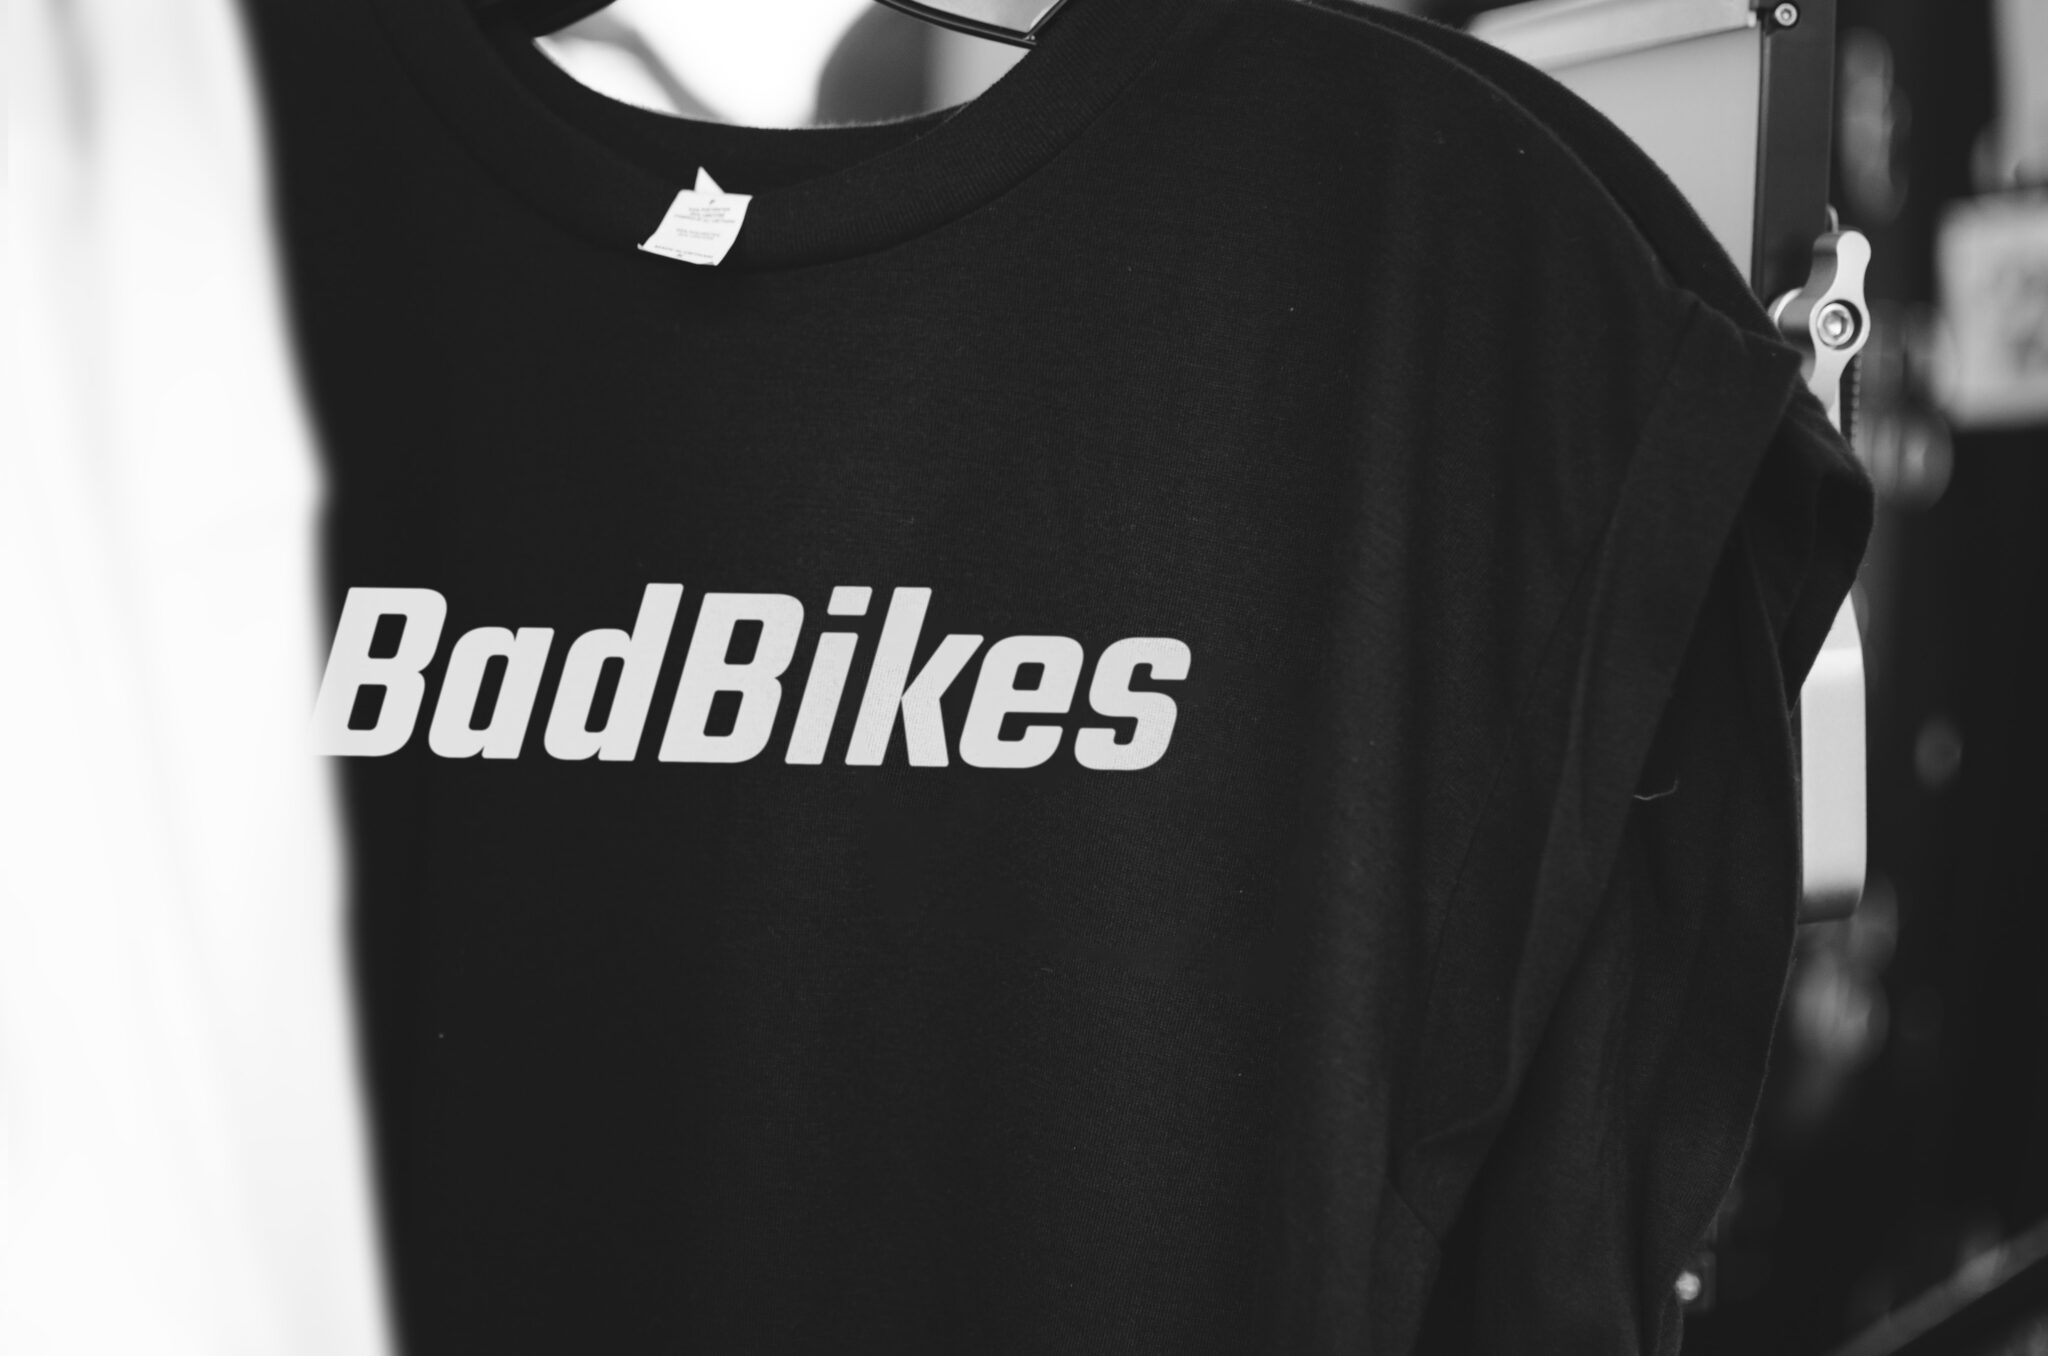 The black and white picture shows a logo for bicycle shop Bad Bikes Berlin on a black T-shirt